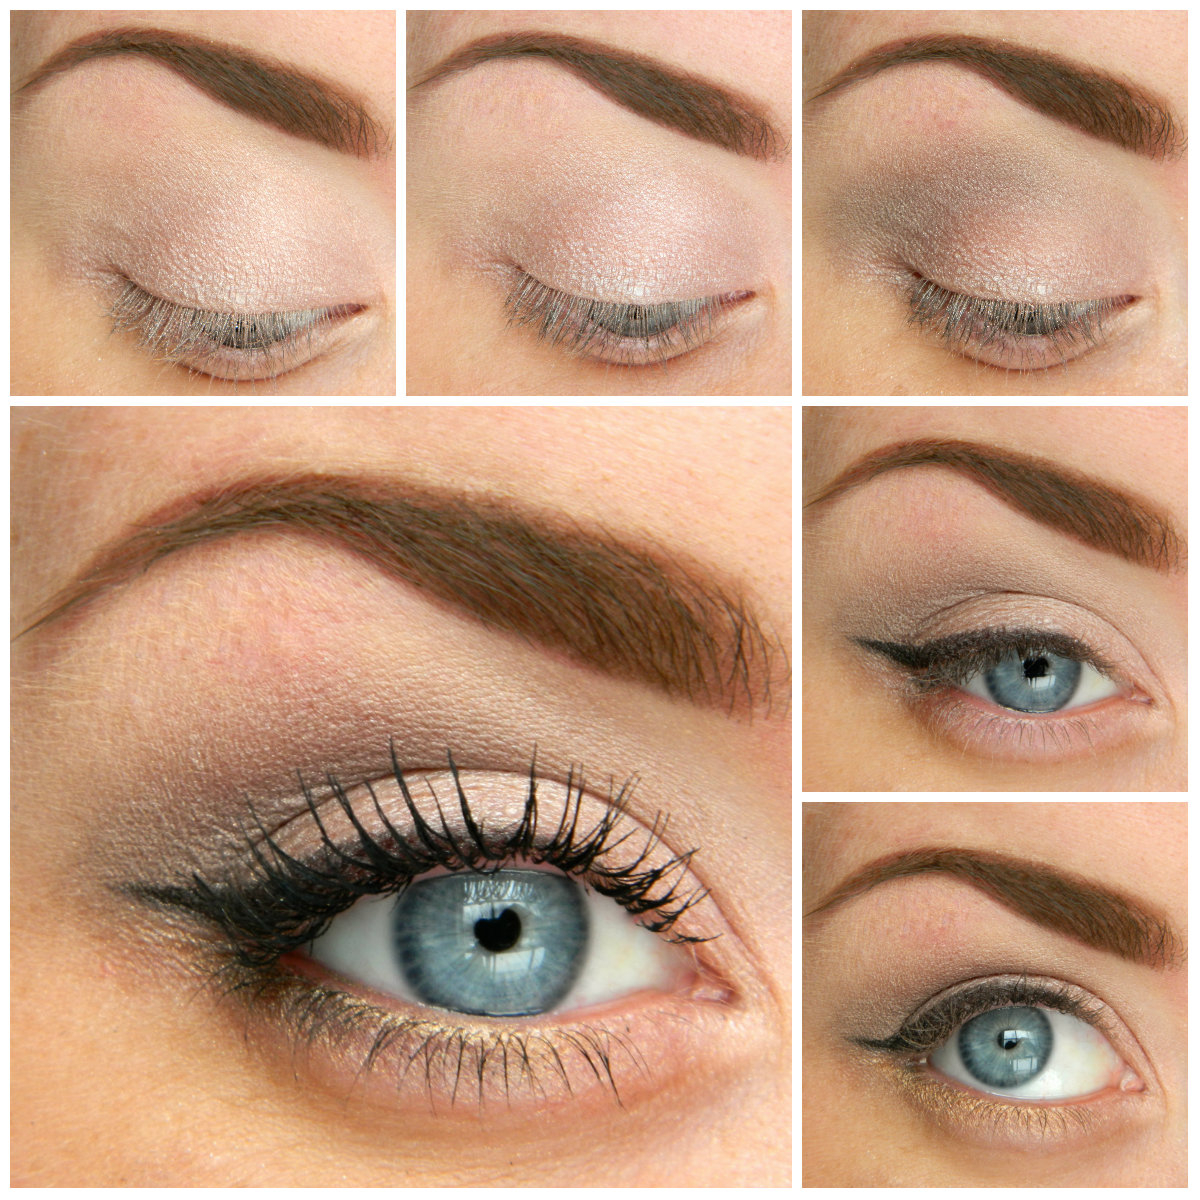 Day Makeup Brown Eyes 5 Ways To Make Blue Eyes Pop With Proper Eye Makeup Her Style Code